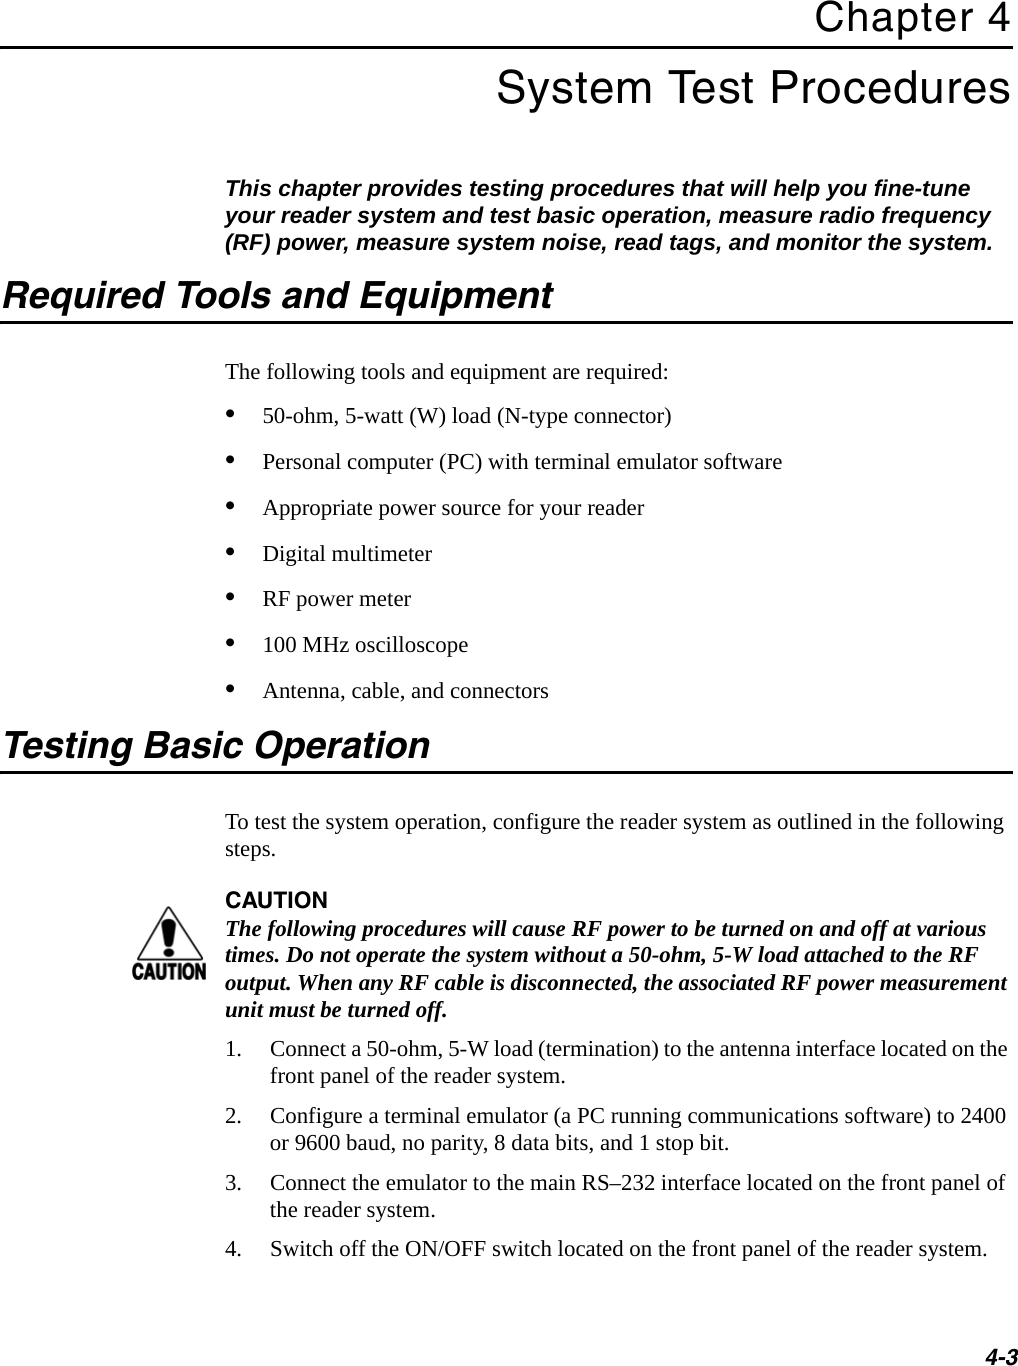 4-3Chapter 4 System Test ProceduresThis chapter provides testing procedures that will help you fine-tune your reader system and test basic operation, measure radio frequency (RF) power, measure system noise, read tags, and monitor the system.Required Tools and EquipmentThe following tools and equipment are required:•50-ohm, 5-watt (W) load (N-type connector)•Personal computer (PC) with terminal emulator software•Appropriate power source for your reader•Digital multimeter•RF power meter•100 MHz oscilloscope•Antenna, cable, and connectorsTesting Basic OperationTo test the system operation, configure the reader system as outlined in the following steps.CAUTIONThe following procedures will cause RF power to be turned on and off at various times. Do not operate the system without a 50-ohm, 5-W load attached to the RF output. When any RF cable is disconnected, the associated RF power measurement unit must be turned off.1. Connect a 50-ohm, 5-W load (termination) to the antenna interface located on the front panel of the reader system.2. Configure a terminal emulator (a PC running communications software) to 2400 or 9600 baud, no parity, 8 data bits, and 1 stop bit.3. Connect the emulator to the main RS–232 interface located on the front panel of the reader system. 4. Switch off the ON/OFF switch located on the front panel of the reader system.